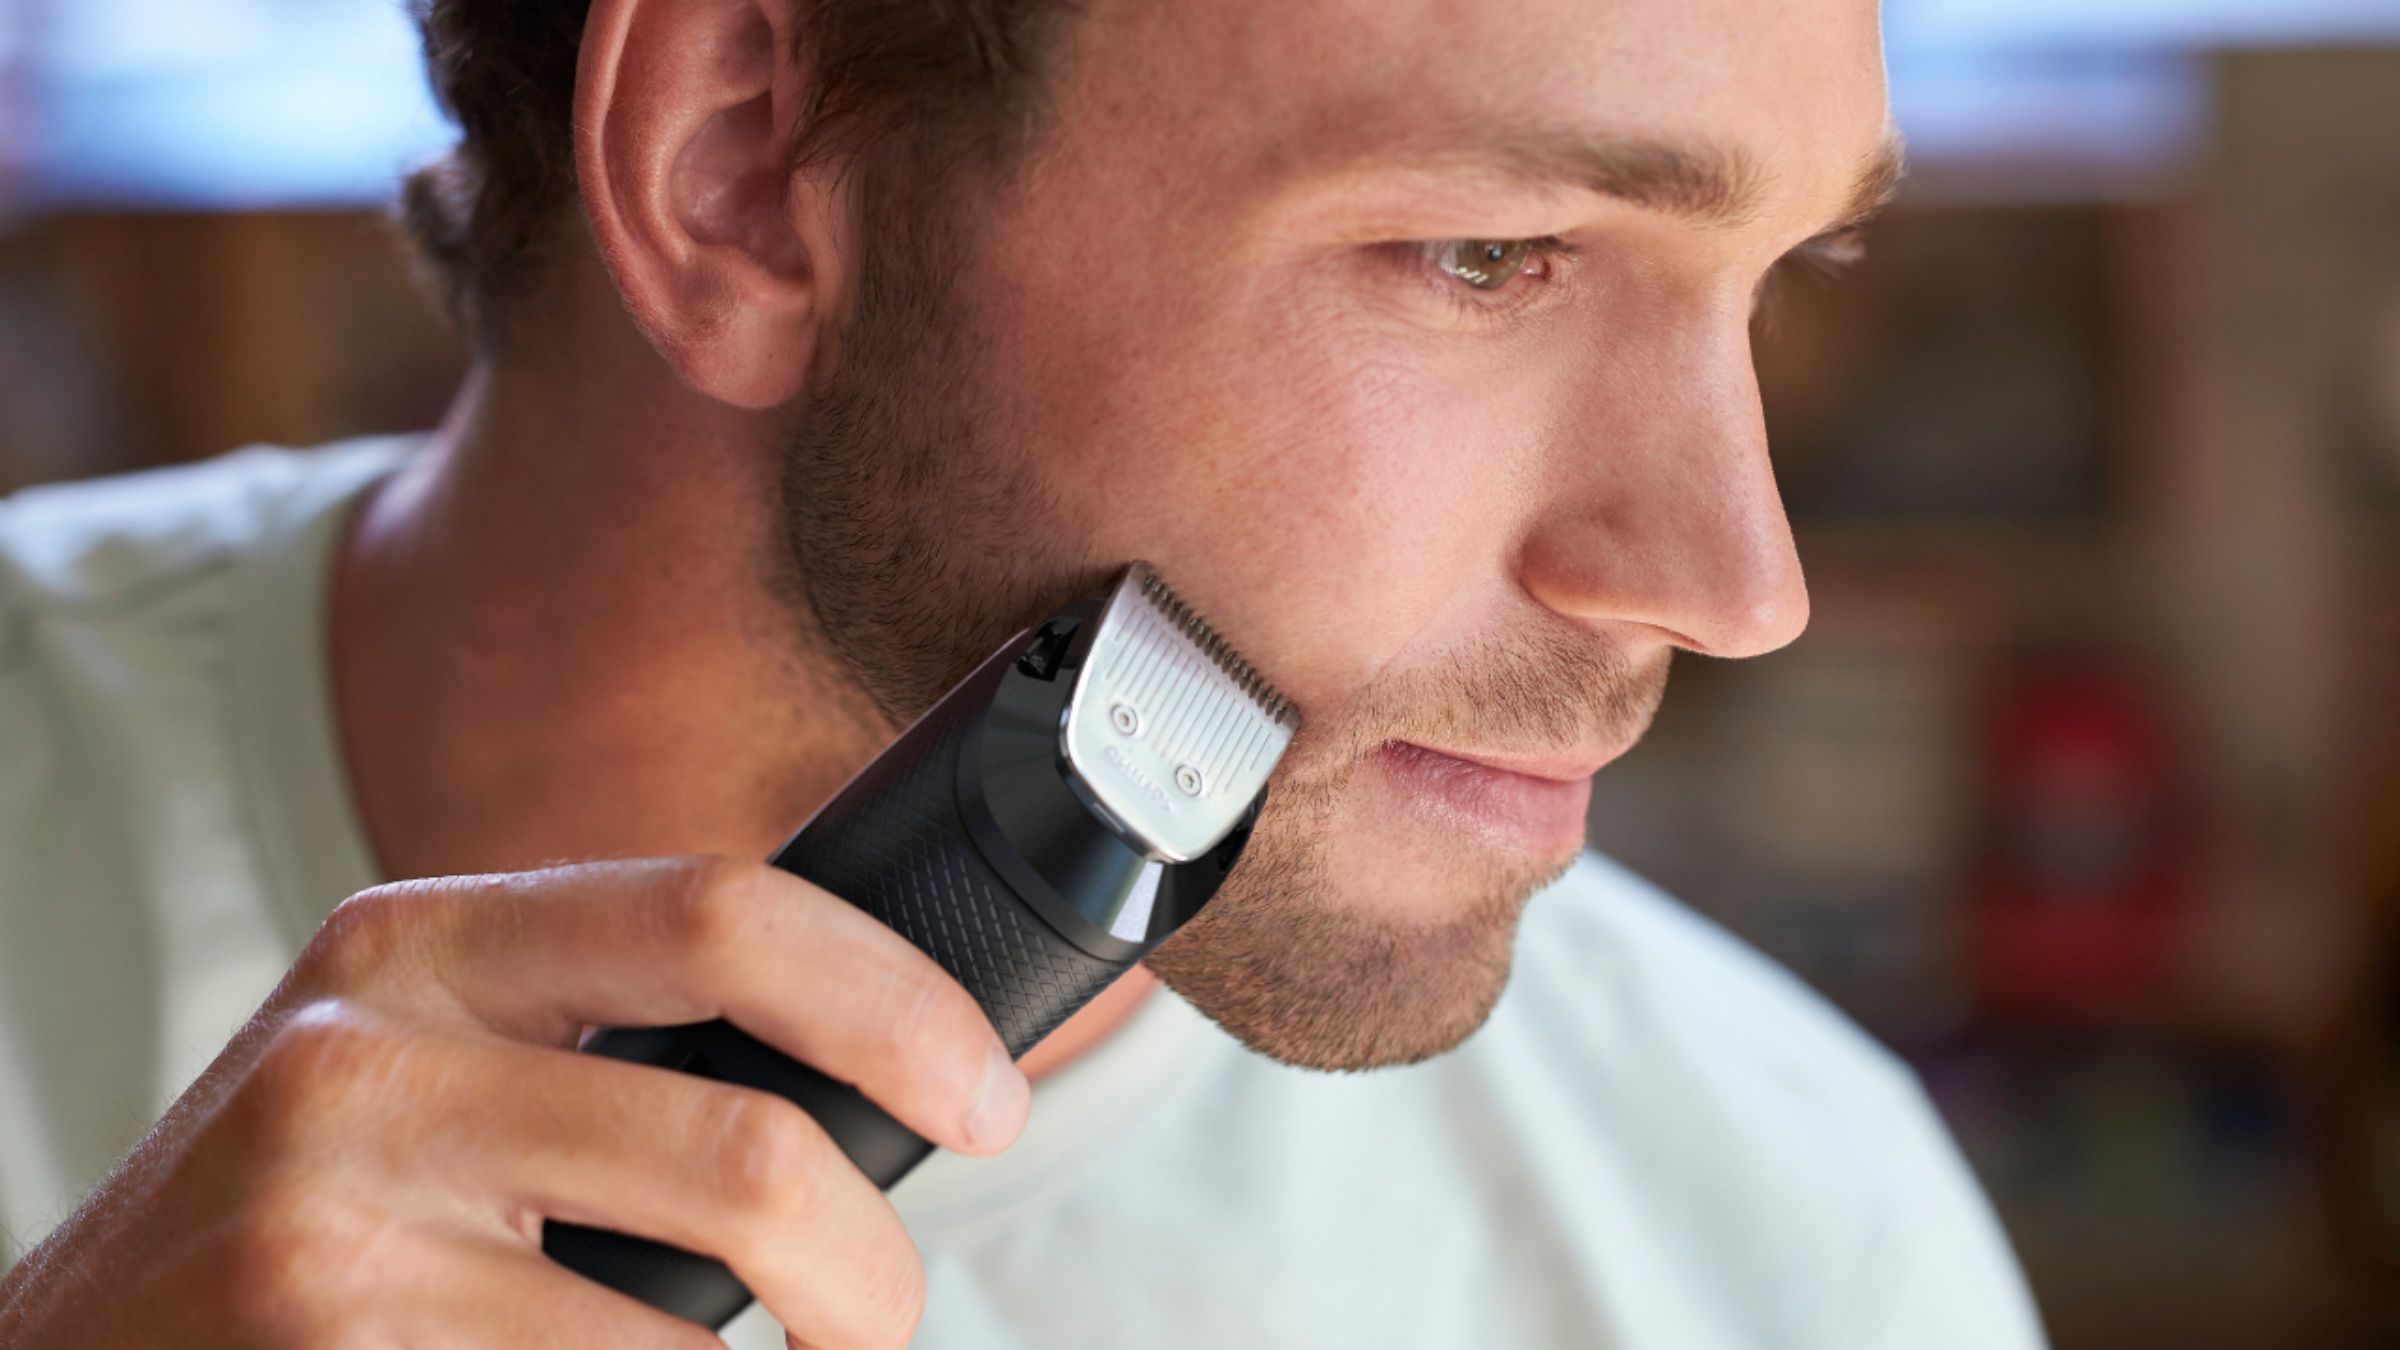 philips series 5000 beard trimmer review